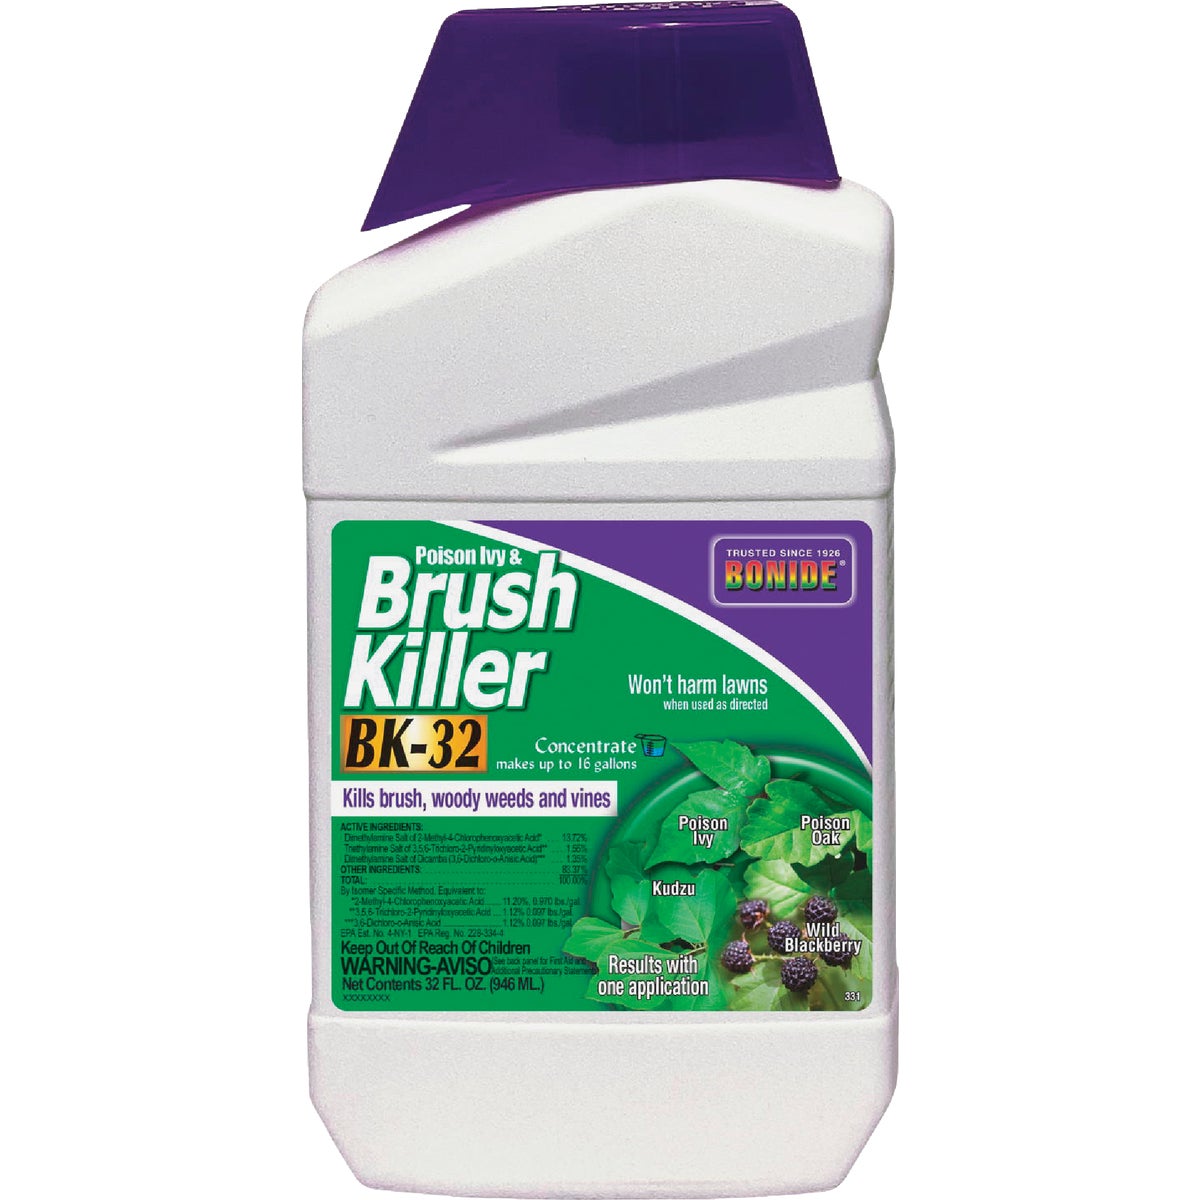 Item 743117, Kill brush and tough weeds at home without harming your lawn with Poison 